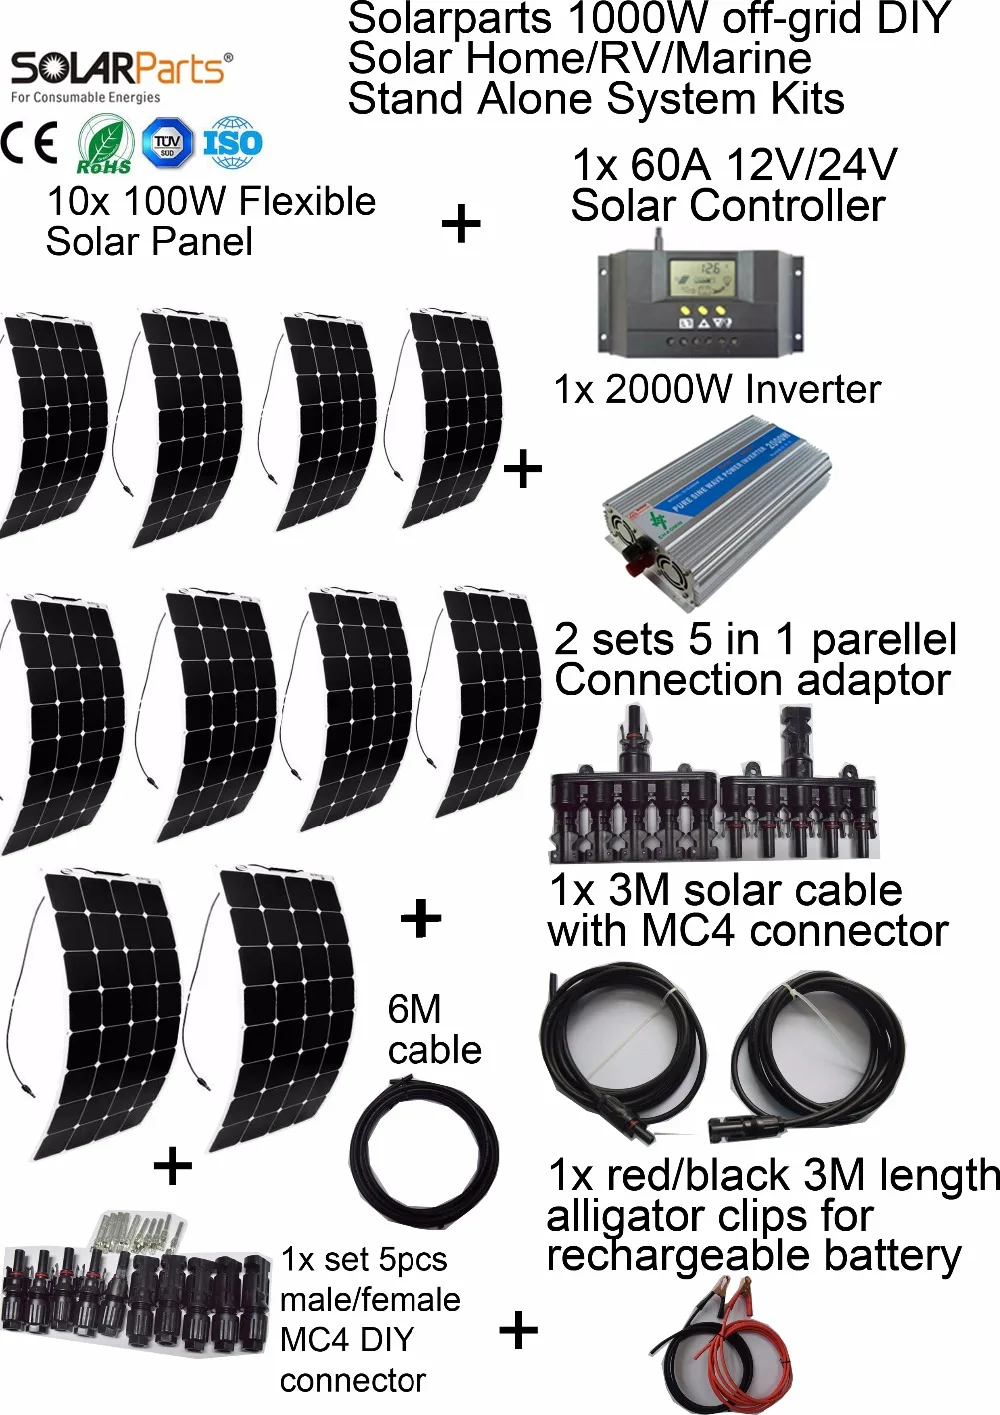 Solarparts 1000W off-grid Solar System KITS flexible solar panel +controller+inverter+cable+adaptor for RV/Marine/Camping/Home .